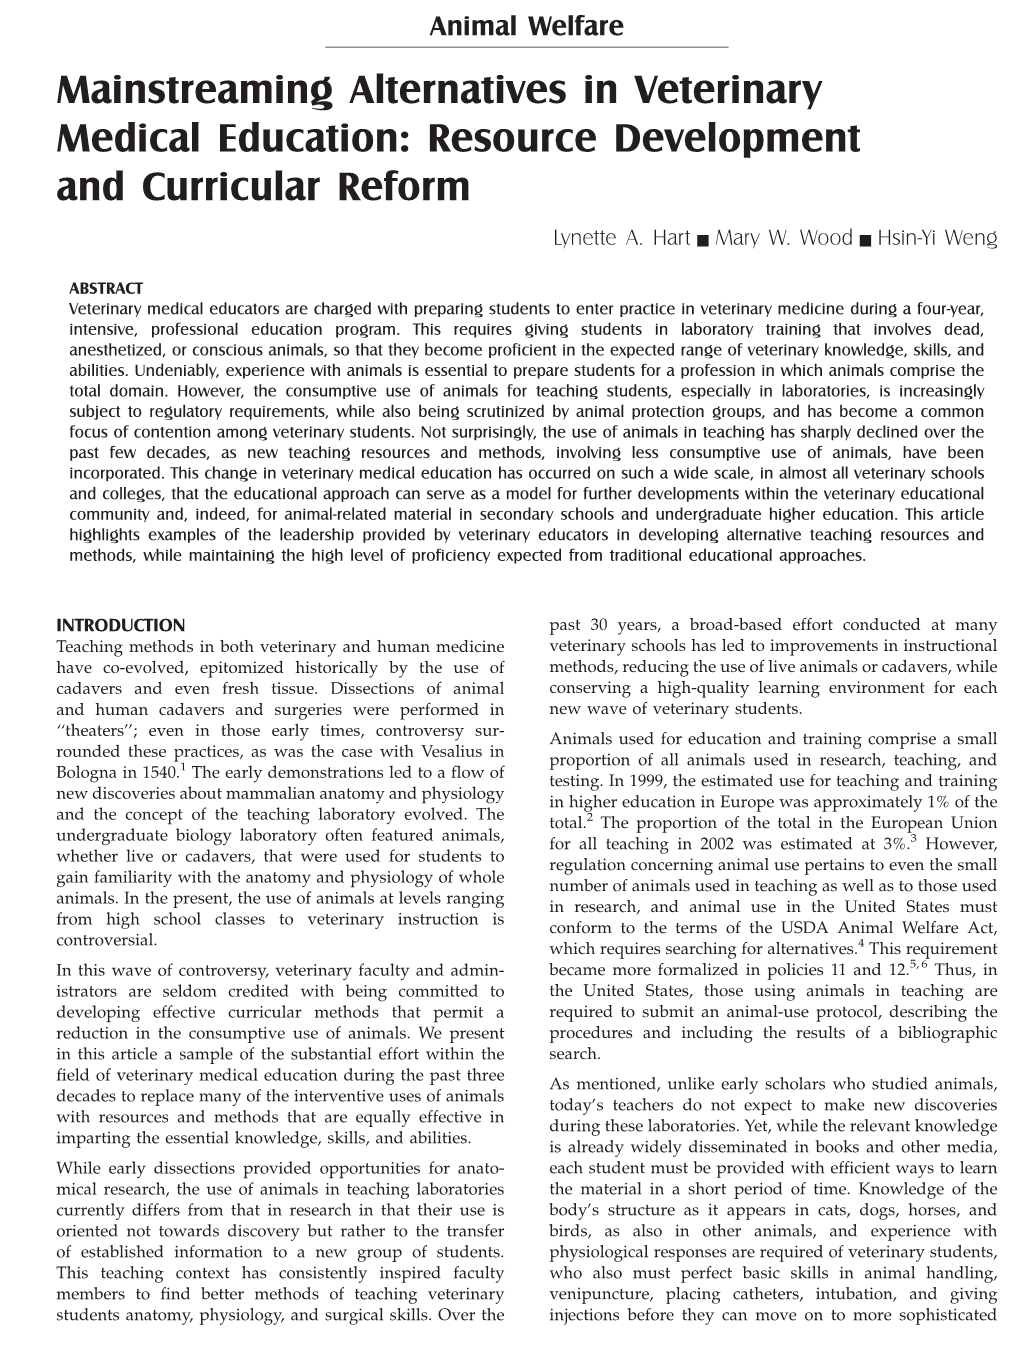 Mainstreaming Alternatives in Veterinary Medical Education: Resource Development and Curricular Reform